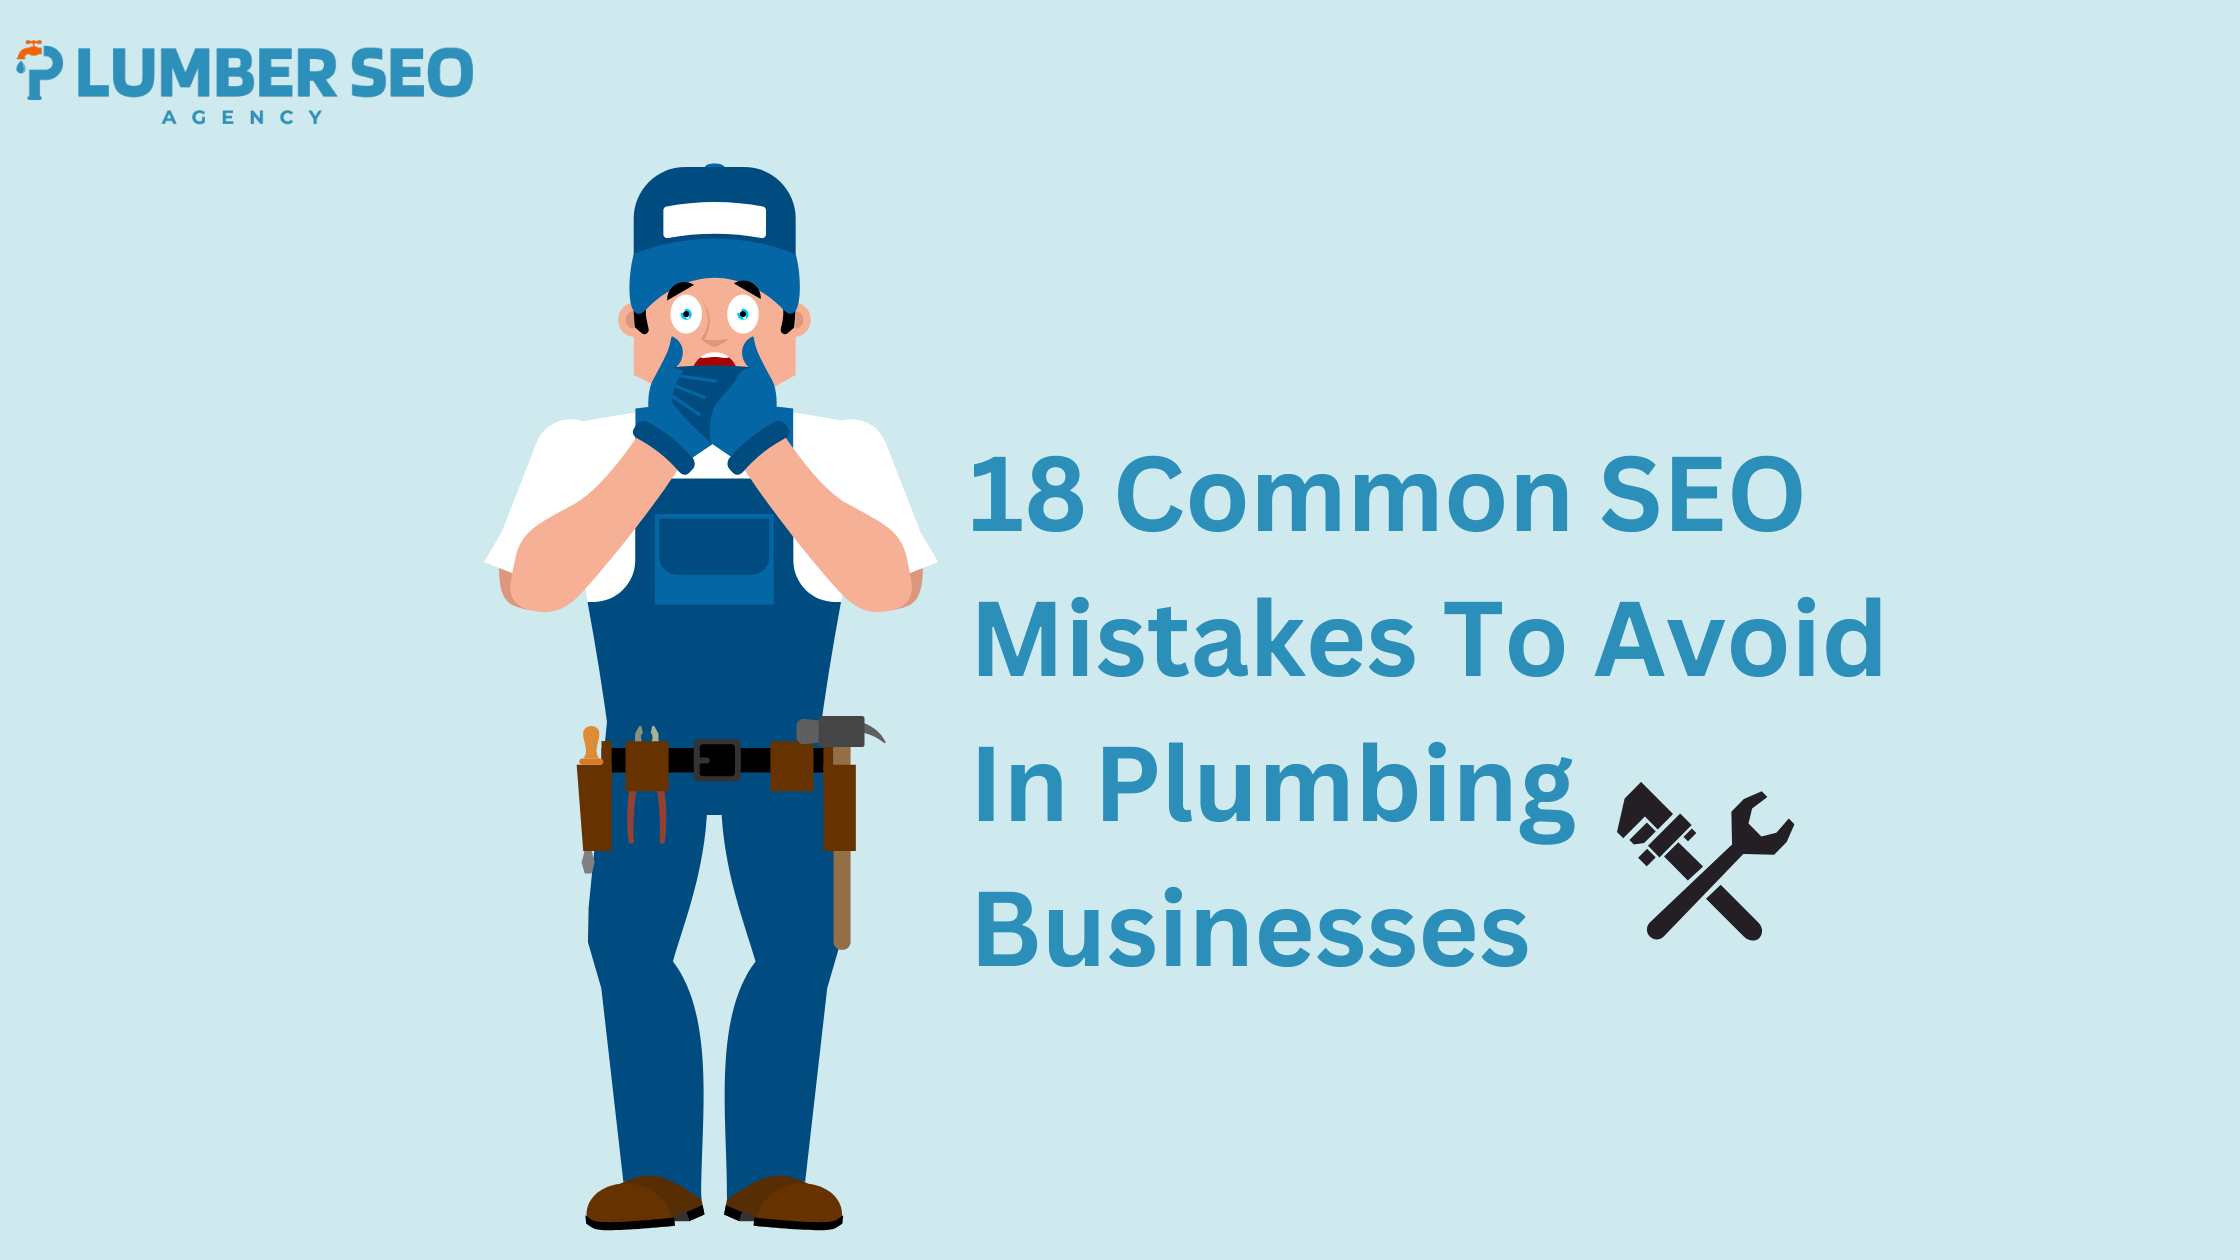 18 Common SEO Mistakes To Avoid In Plumbing Businesses